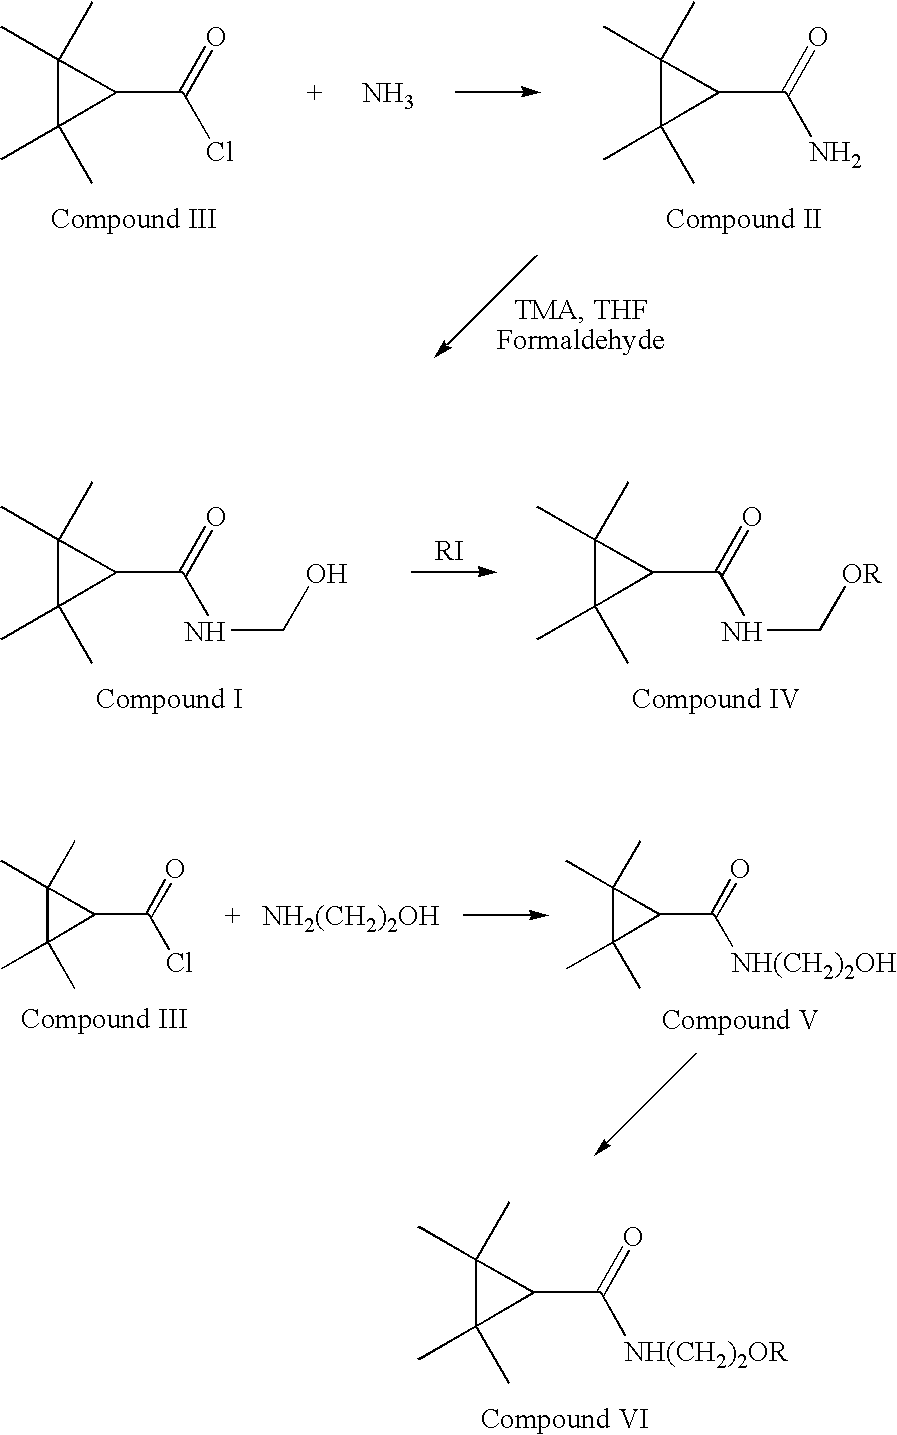 Derivatives and pharmaceutical compositions of n-hydroxyalkyl tetramethylcyclopropane-carboxamide, having anti-epiletic, neurological, and CNS activity, and method for their preparation